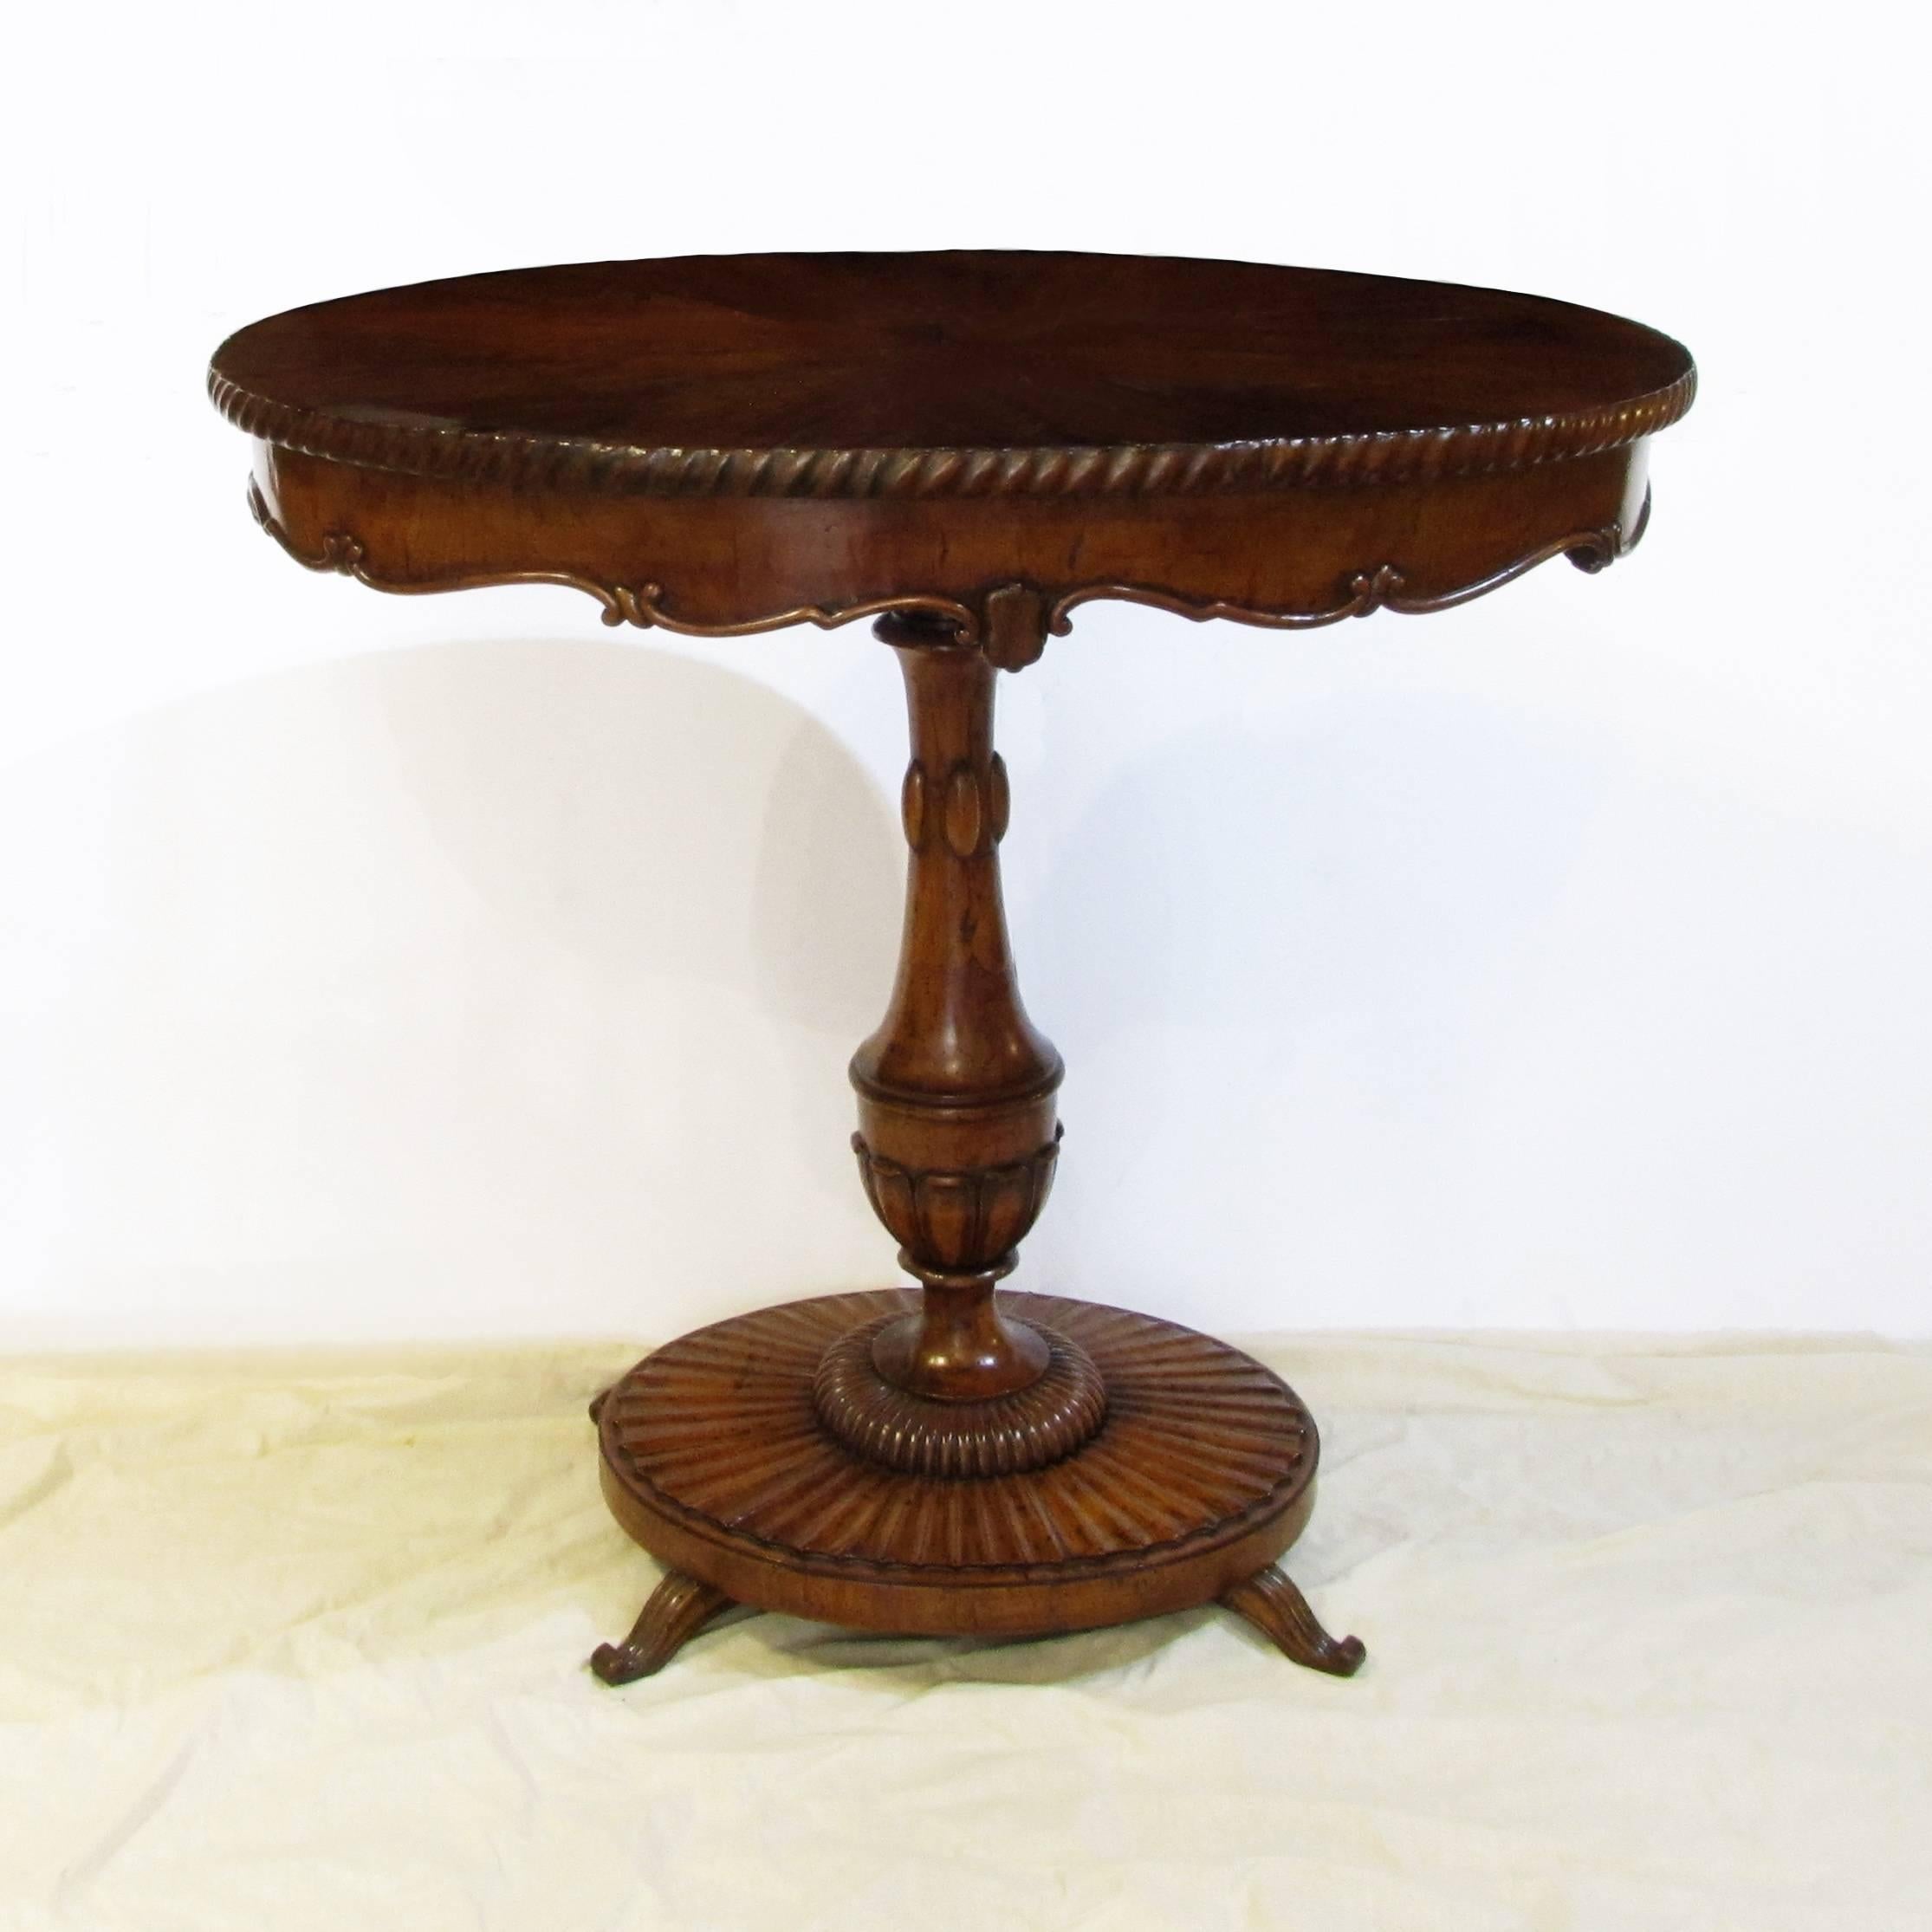 A charming early 19th century small Tuscan centre table.
Beautiful oval inlaid walnut briar root table top above carved pedestal in the form of an amphora.
Beautiful carved oval base with four small scrolled feet.
Close to the style of the